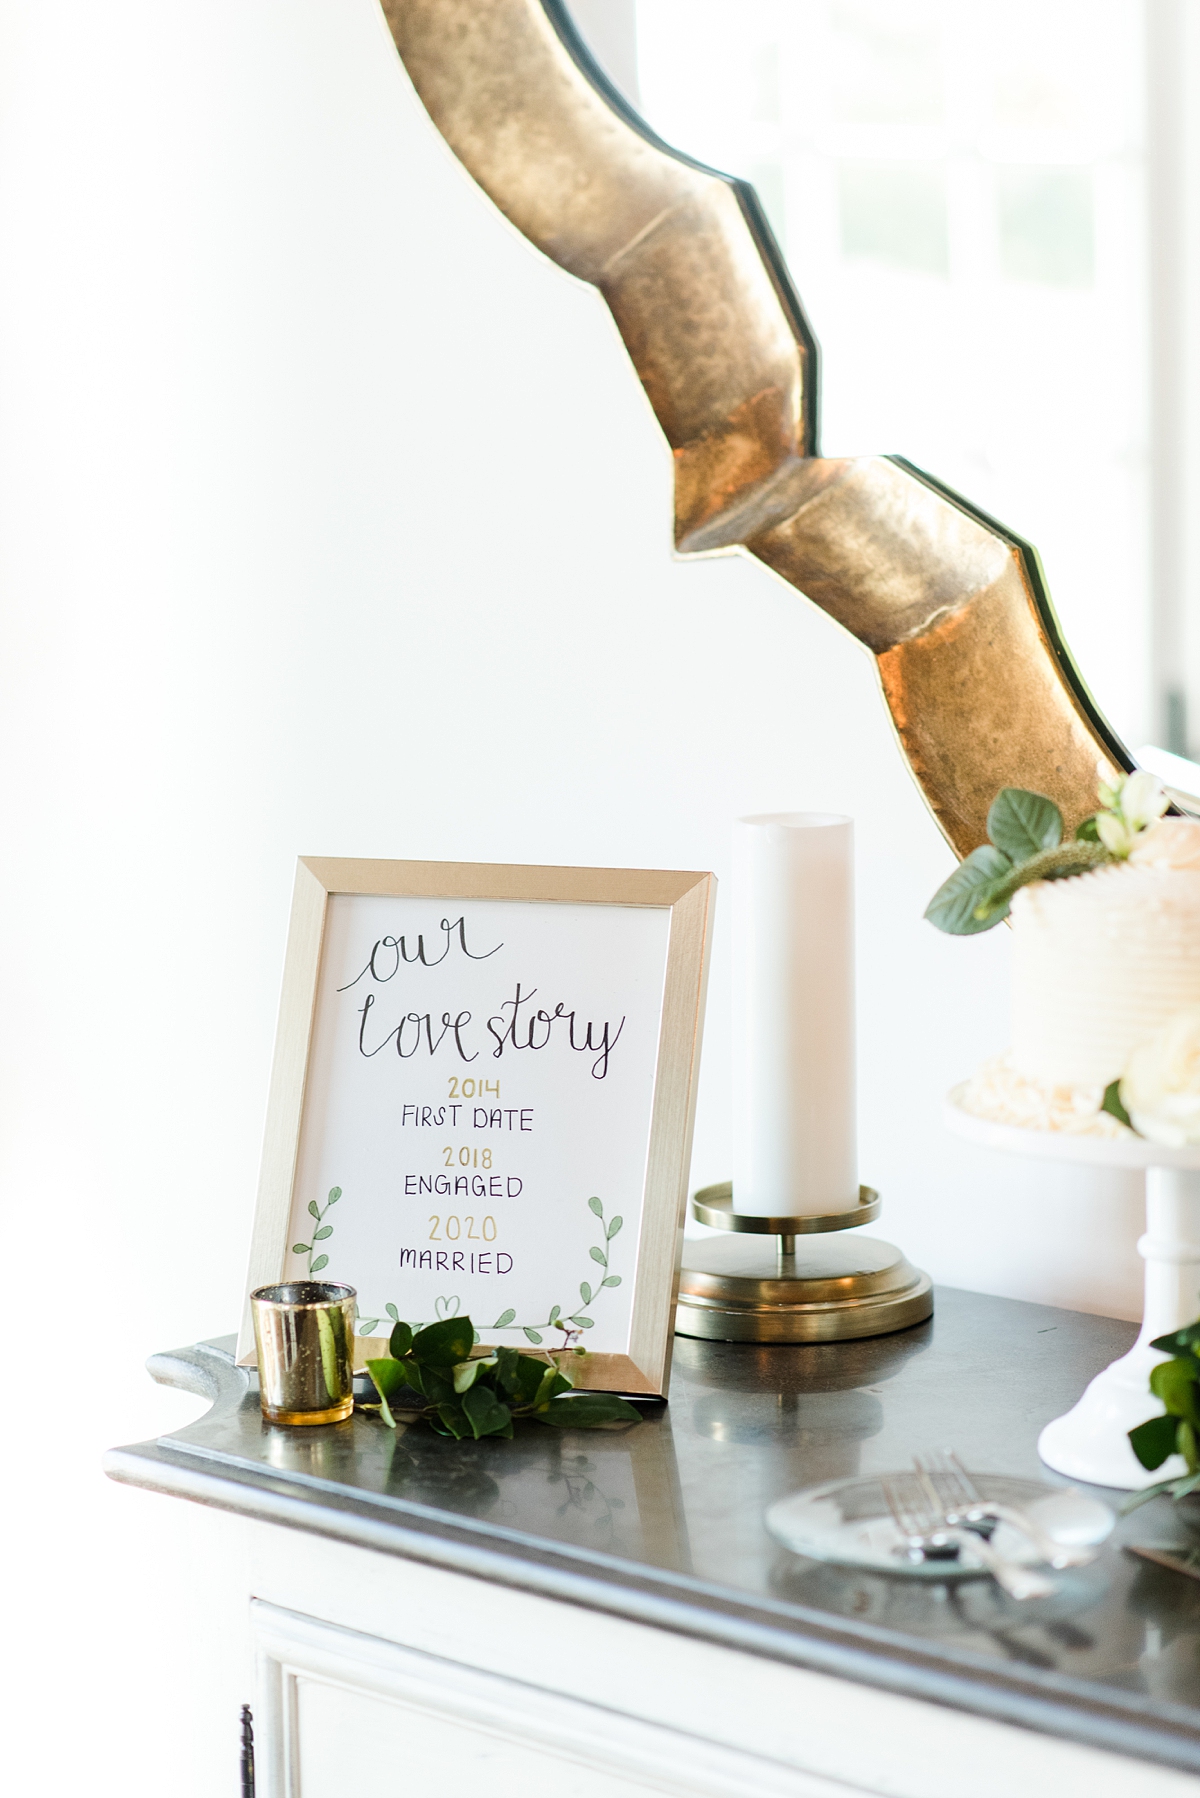 Love Story Cake Table Sign at Burlington Fall Wedding Reception. Wedding Photography by Virginia Wedding Photographer Kailey Brianne Photography. 